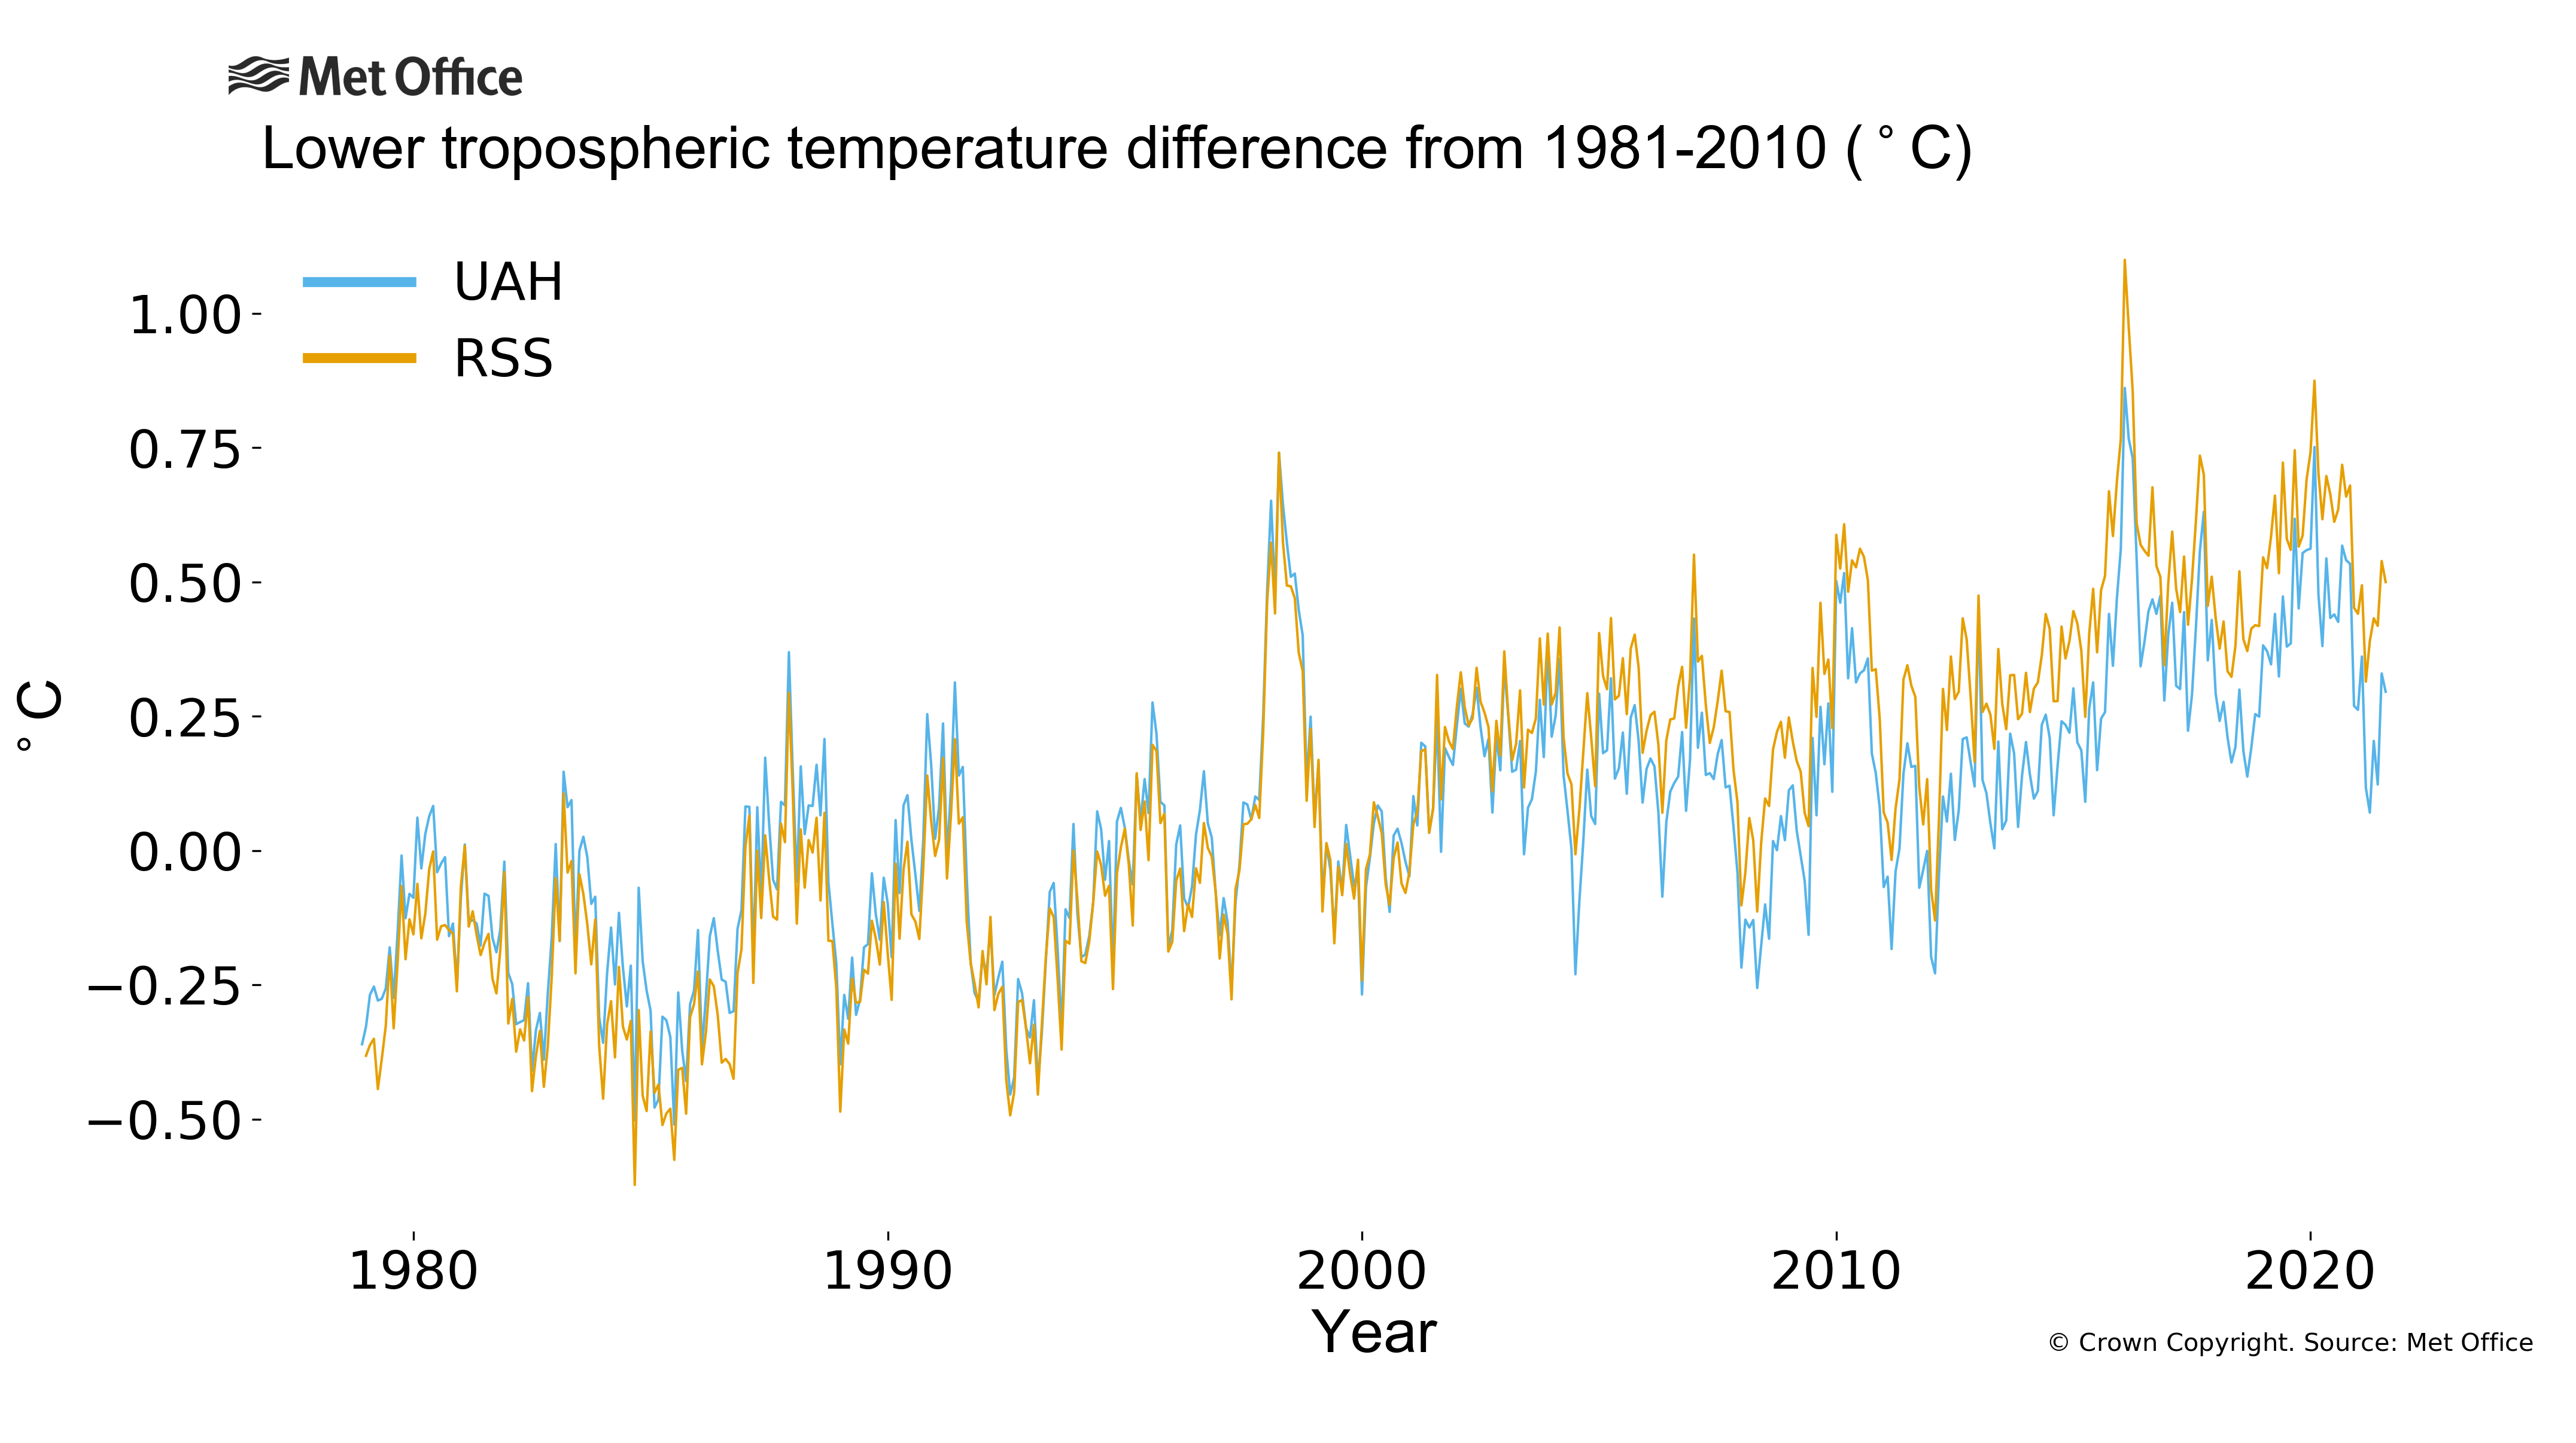 
Monthly quasi-global tropospheric temperature difference from the average for 1981-2010
